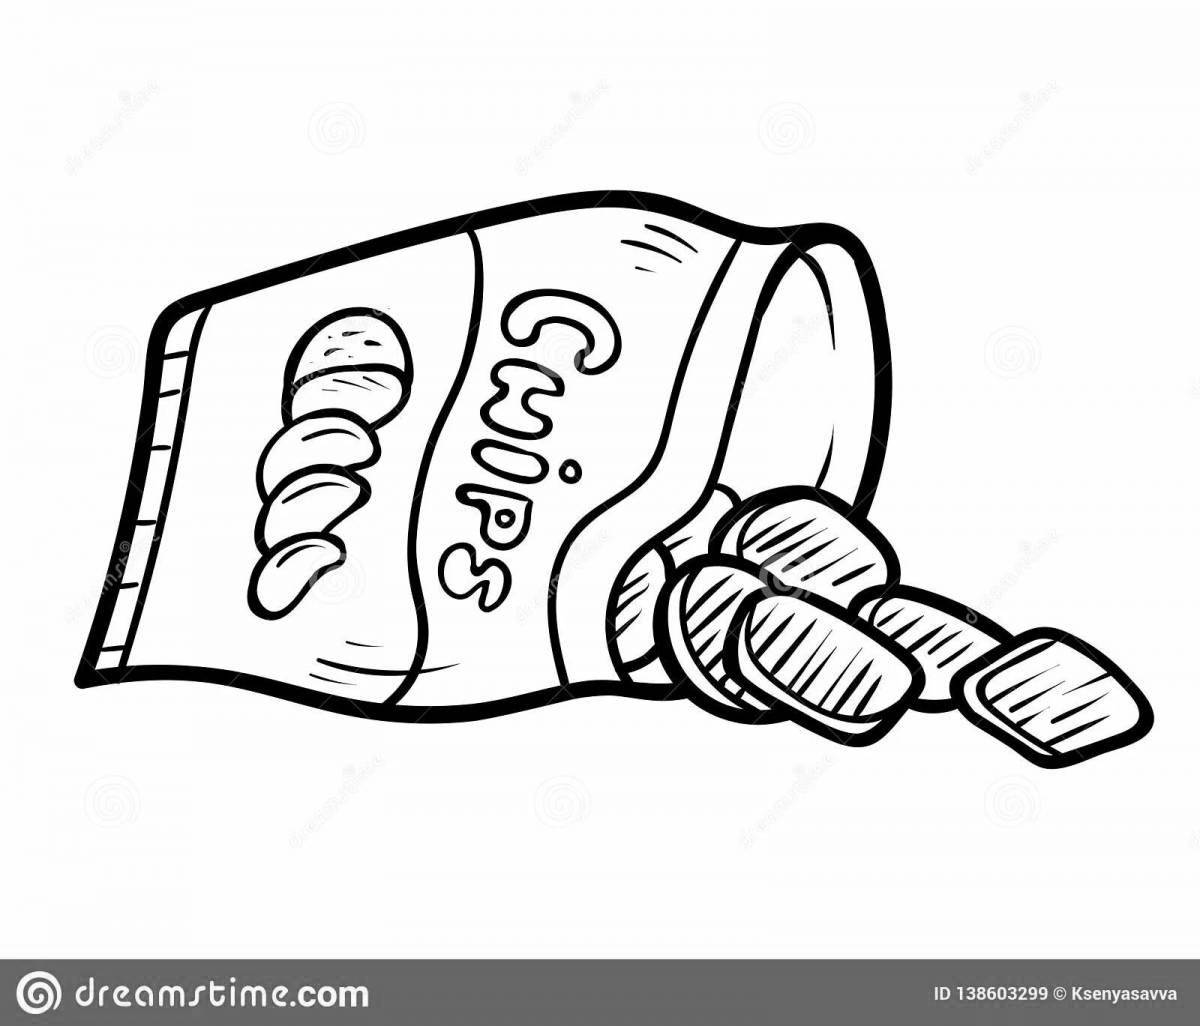 Attractive chip coloring page for kids